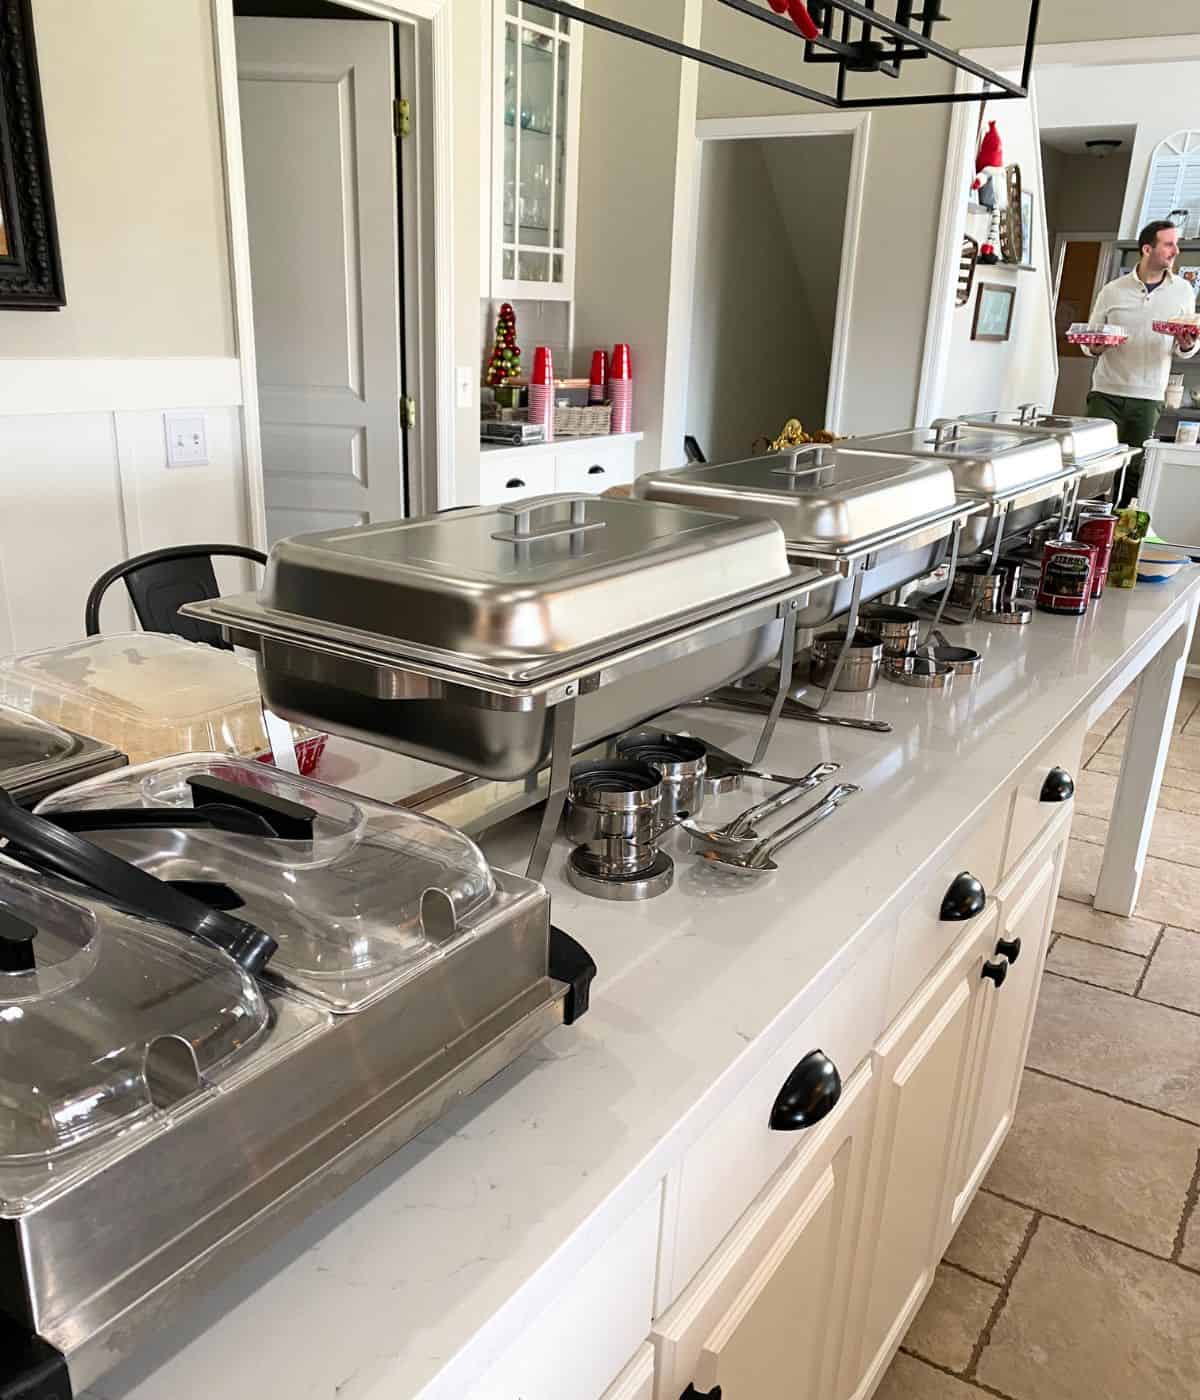 Chafing dishes set up on island in kitchen.